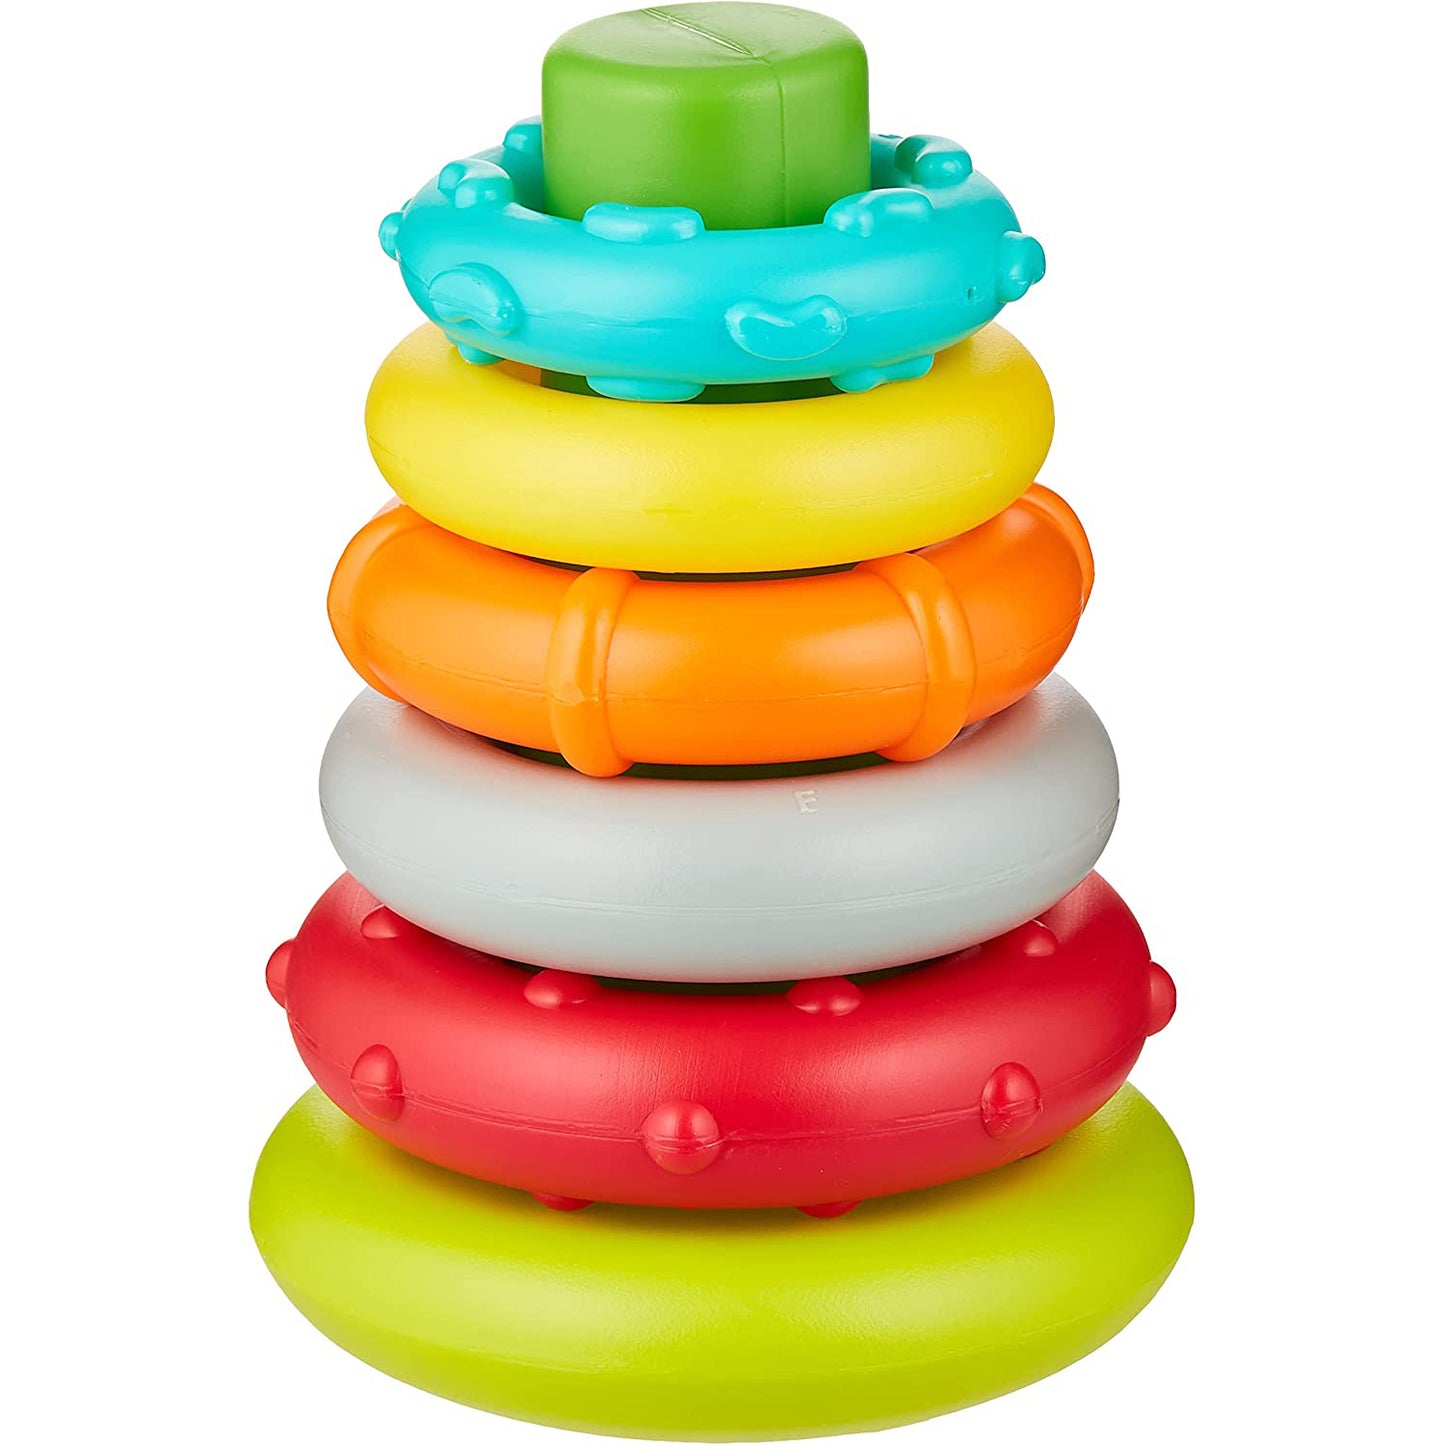 FITTO Stack a Ring Toy Classic Educational